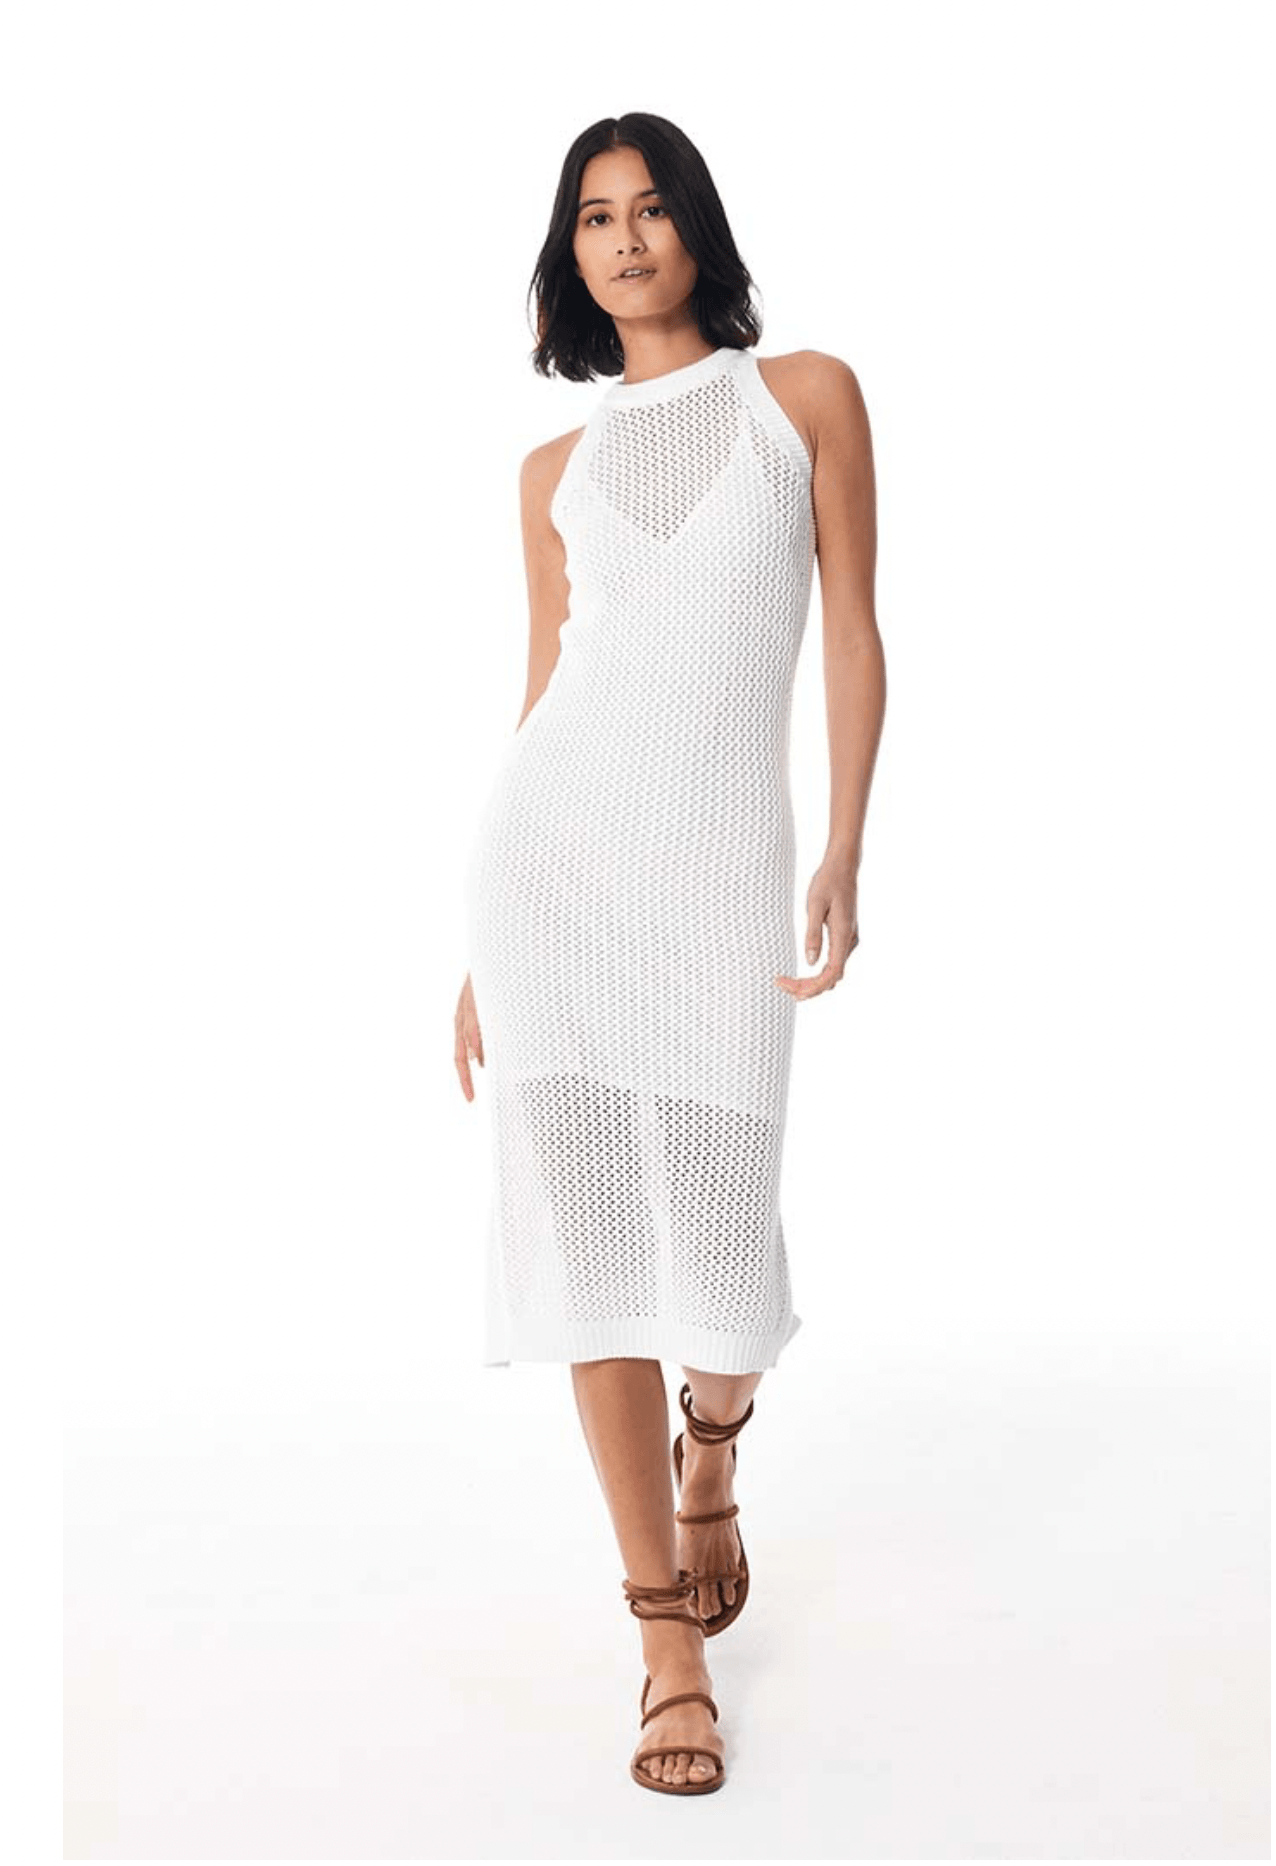 Chev Crochet Dress in White by YFB - Haven